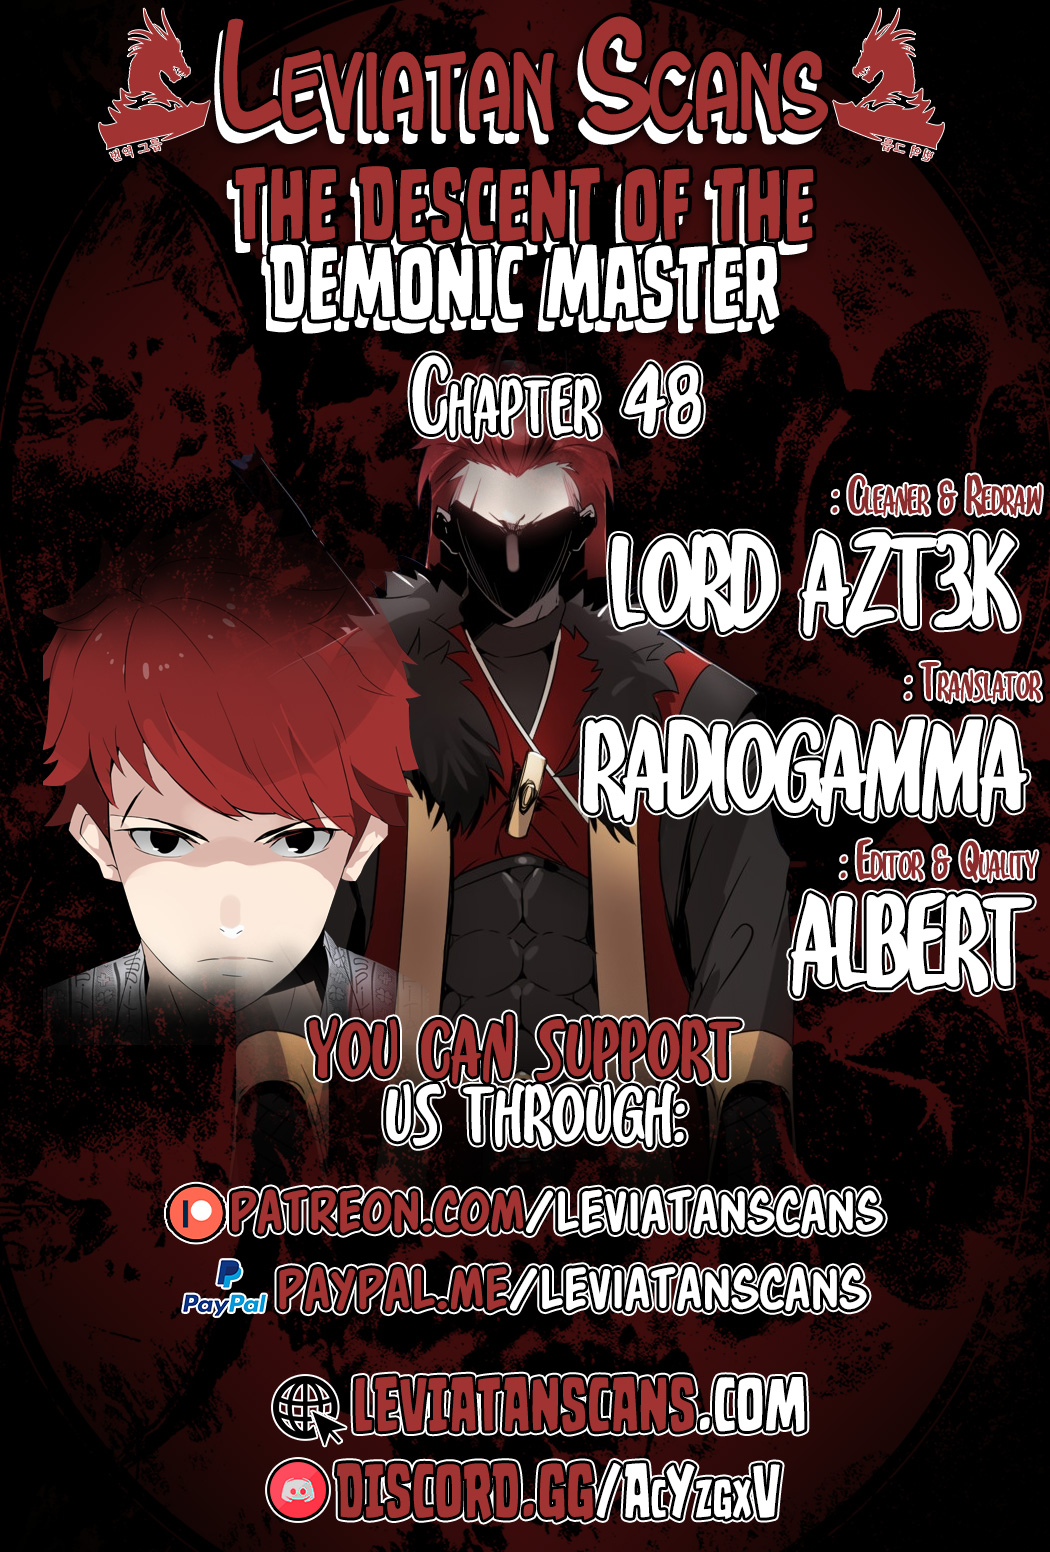 The Descent of the Demonic Master - Chapter 309 - Image 1